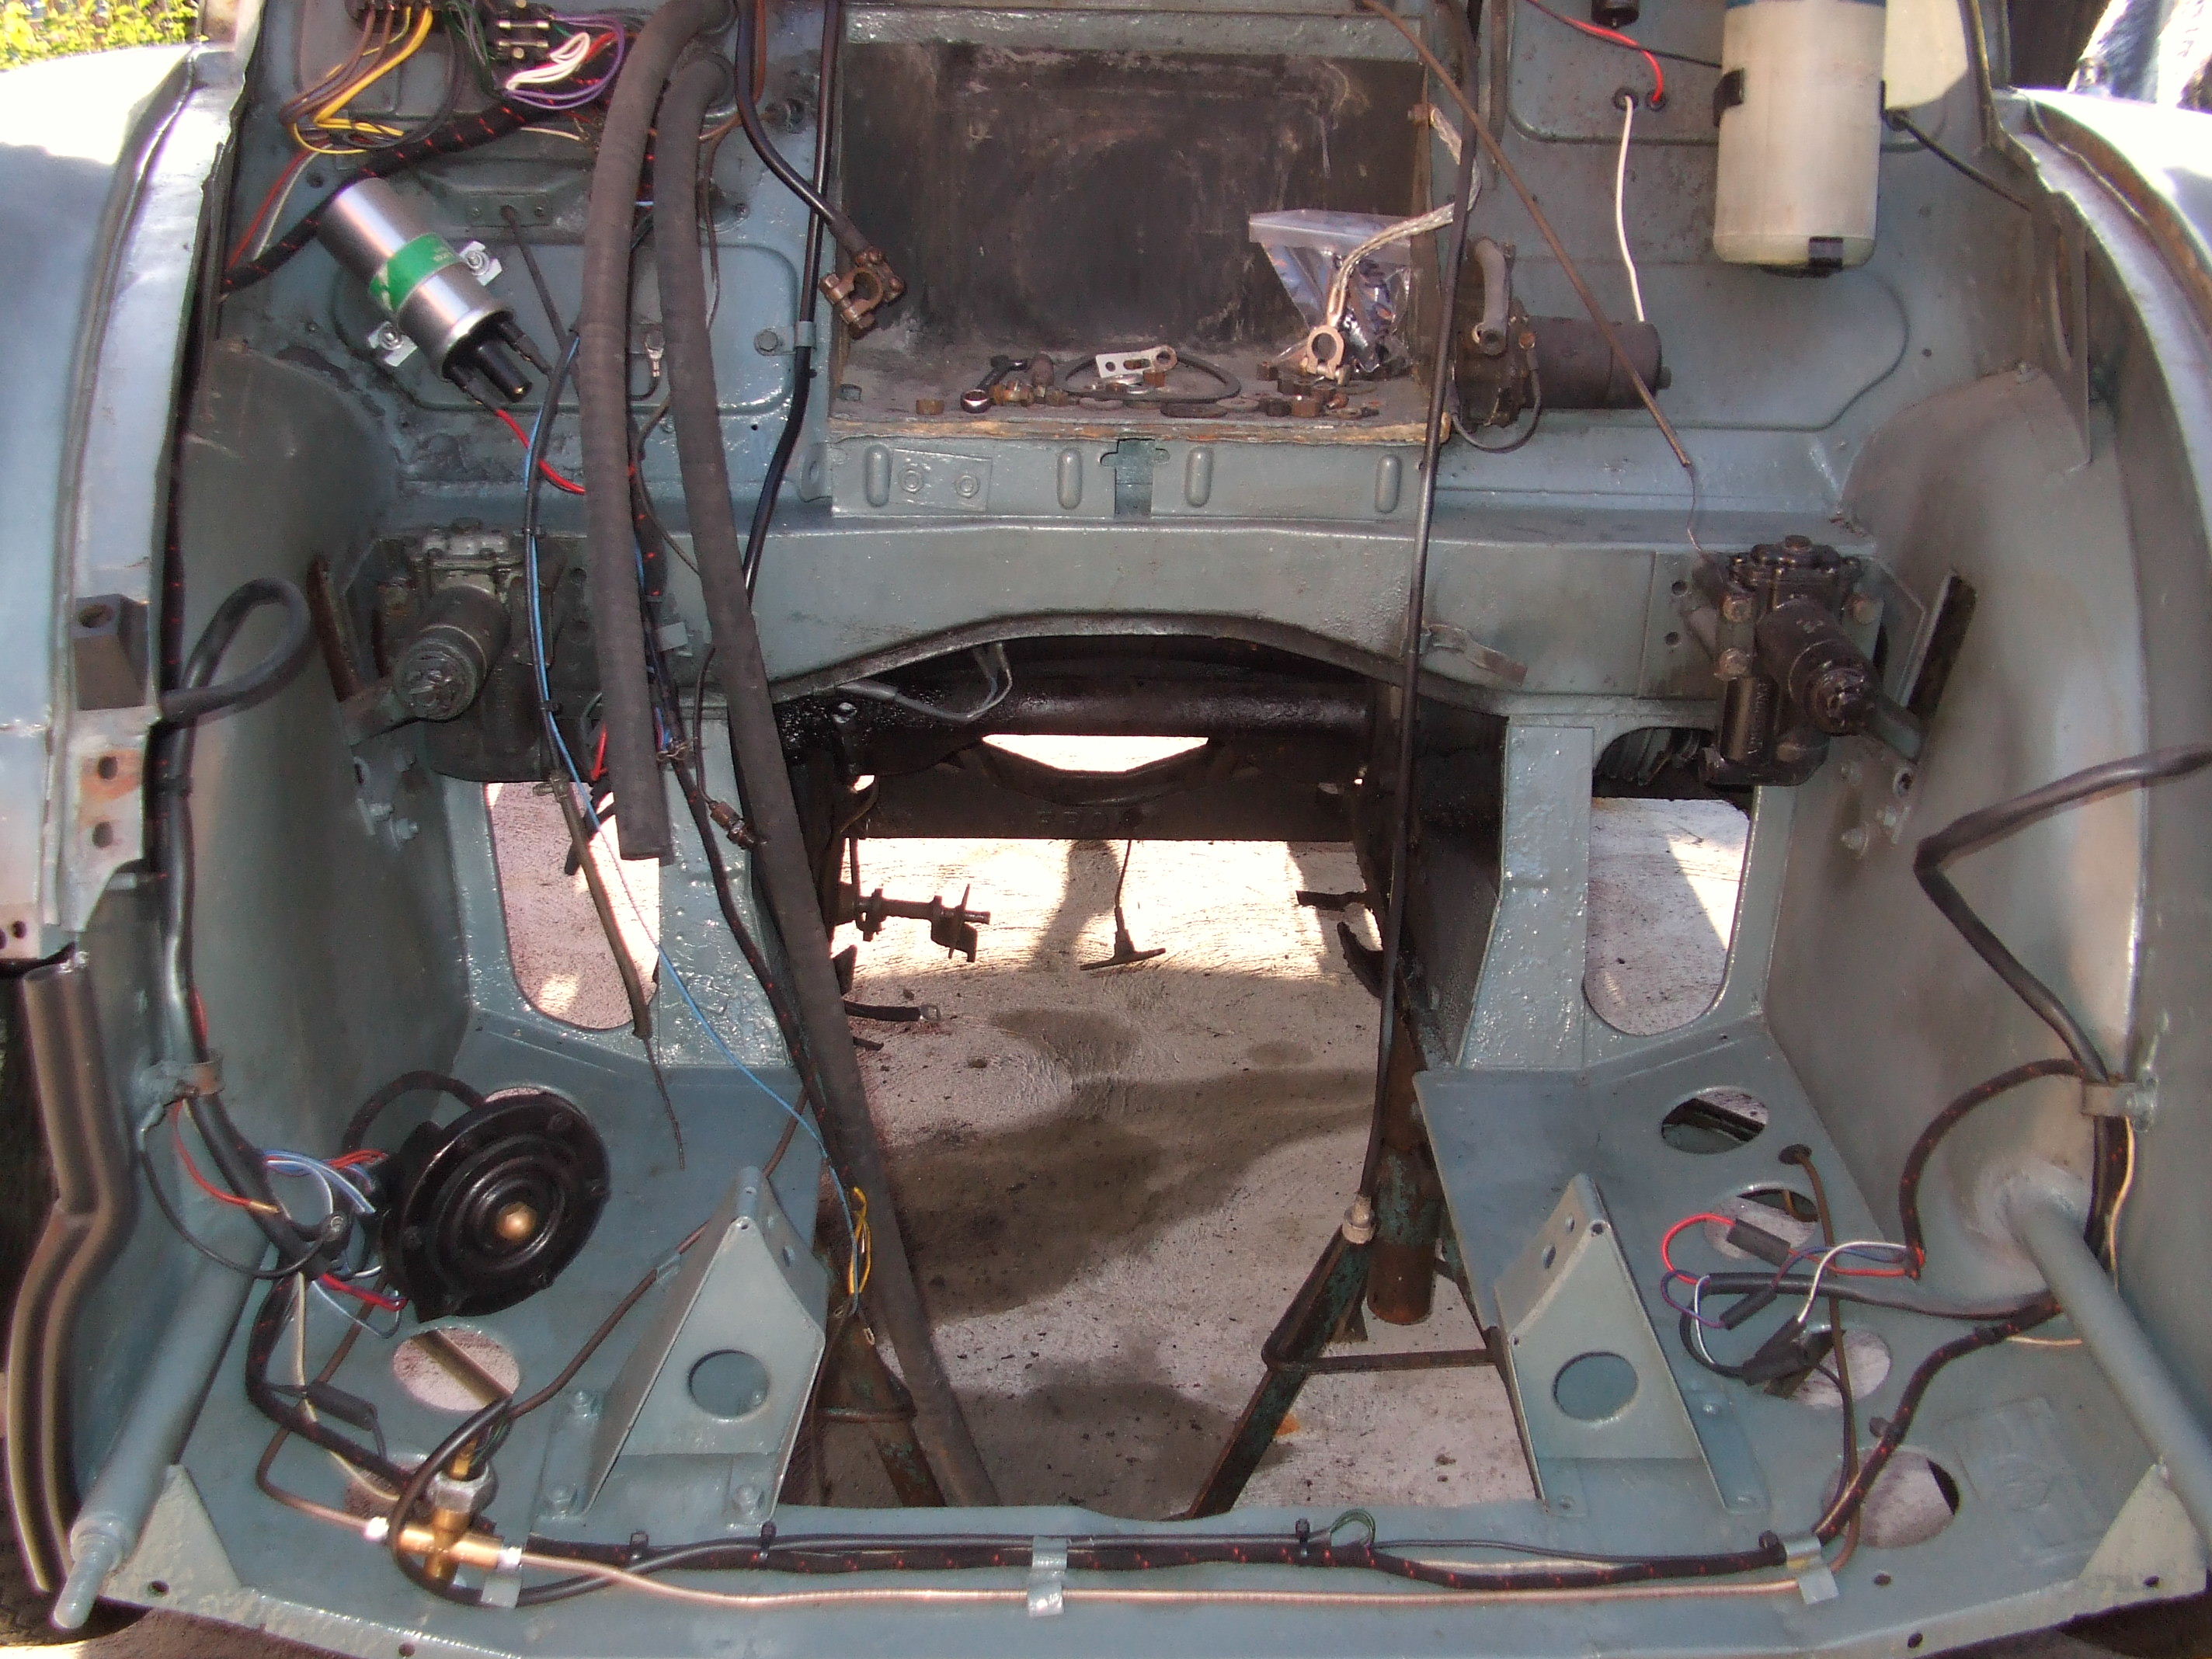 Sally's engine bay after the tart up 1.JPG